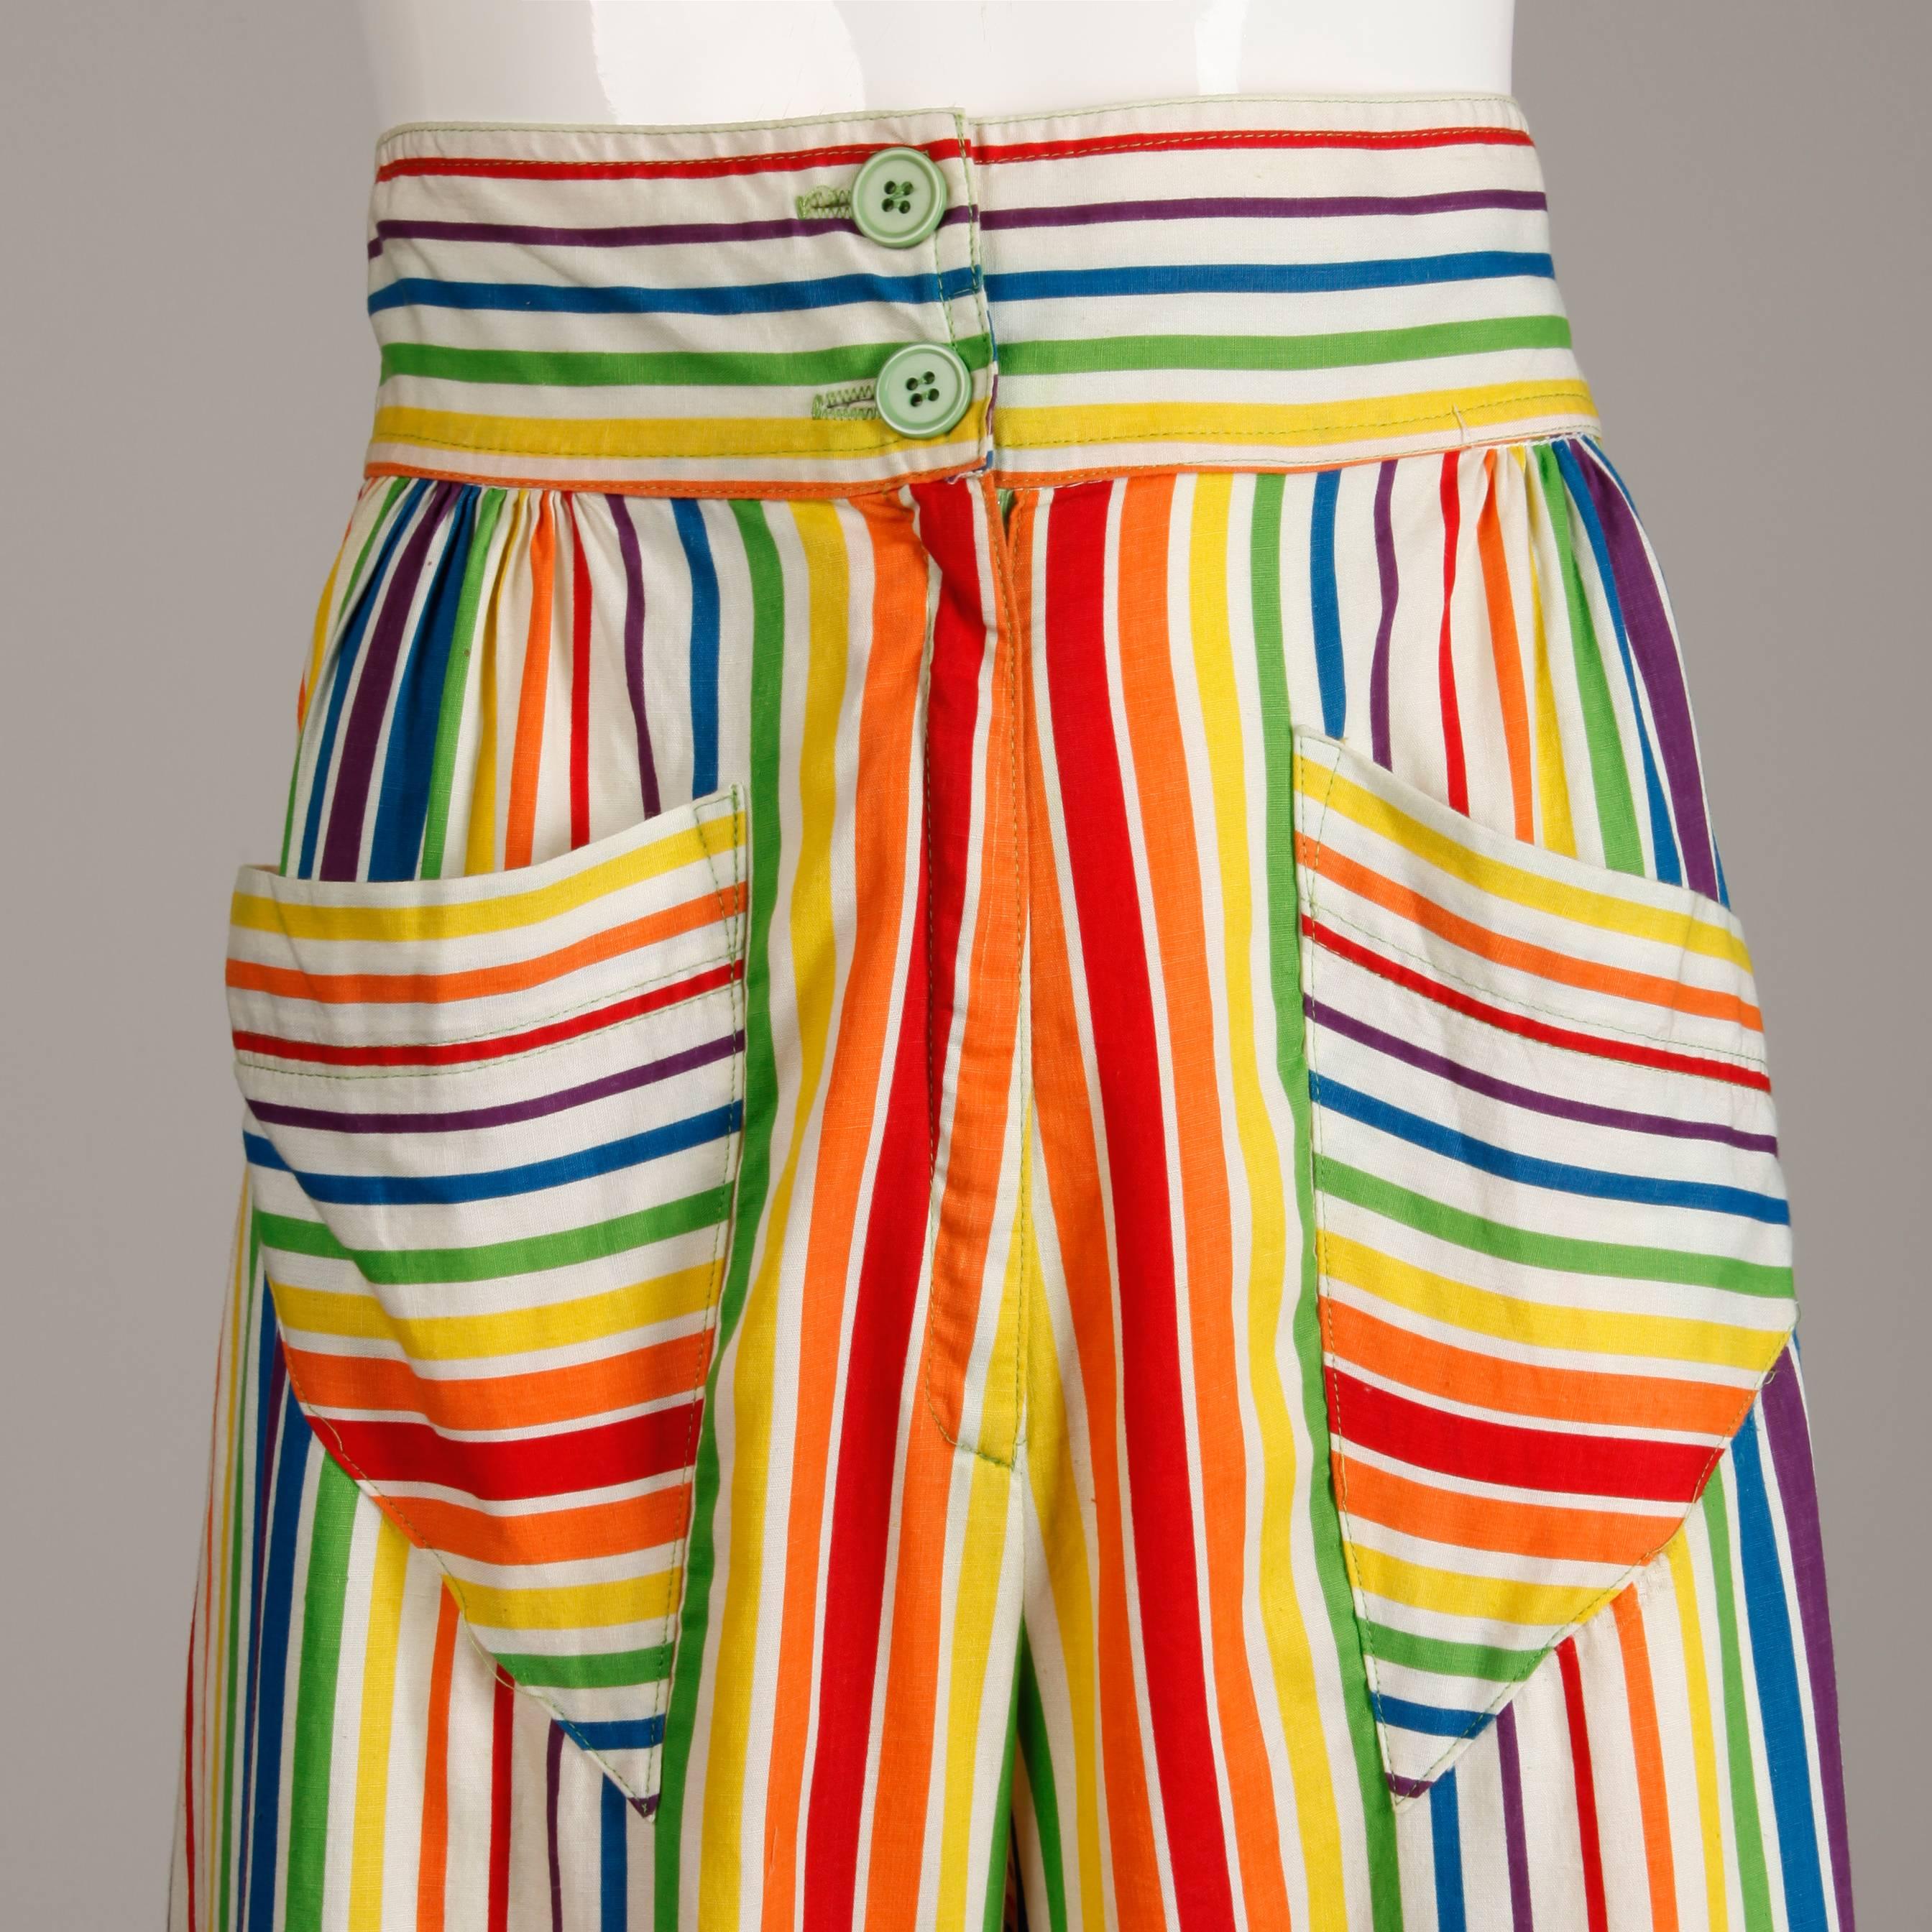 Betsey Johnson for Alley Cat Vintage Rainbow Striped Palazzo Pants, 1970s In Excellent Condition For Sale In Sparks, NV